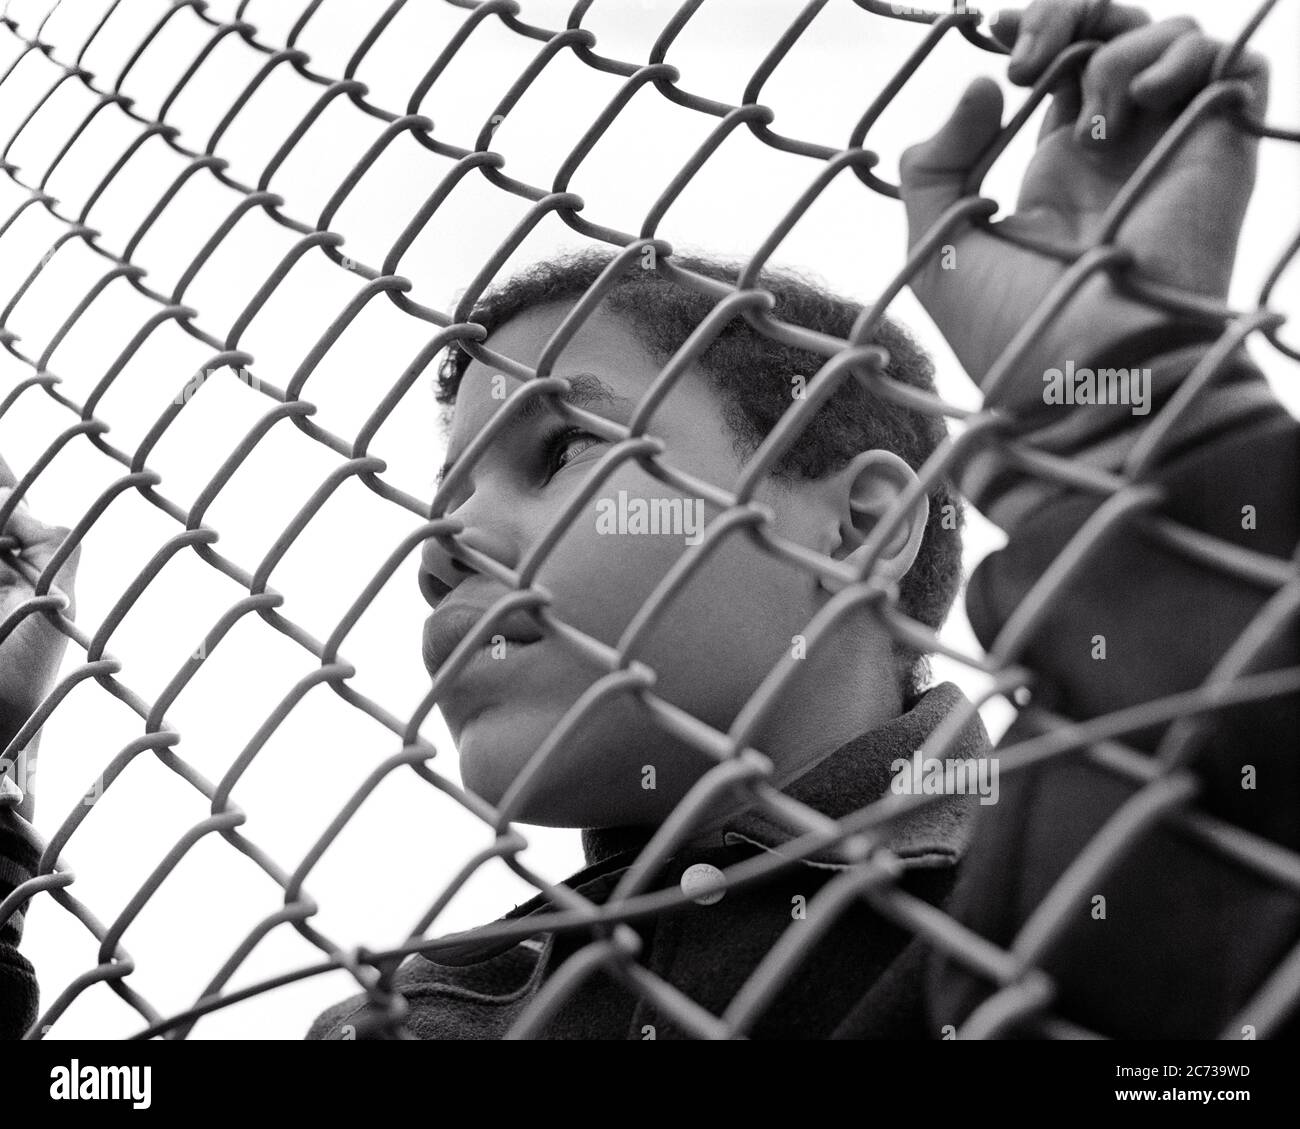 1960s AFRICAN-AMERICAN PRE-TEEN BOY LOOKING THROUGH CHAIN-LINK FENCE - n1933 HAR001 HARS FREEDOM GOALS DREAMS HEAD AND SHOULDERS AFRICAN-AMERICANS AFRICAN-AMERICAN LOW ANGLE BLACK ETHNICITY CONCEPTUAL DEPRIVED ESCAPE TEENAGED DENIED DISADVANTAGED LOOKING IN BARRIER CHAIN-LINK CONFINED DISAFFECTED DISAPPOINTED DISCONNECTED GROWTH IMPOVERISHED JUVENILES PRE-TEEN PRE-TEEN BOY TRAPPED BLACK AND WHITE DISTRAUGHT HAR001 OLD FASHIONED RESTRICT THRU AFRICAN AMERICANS Stock Photo